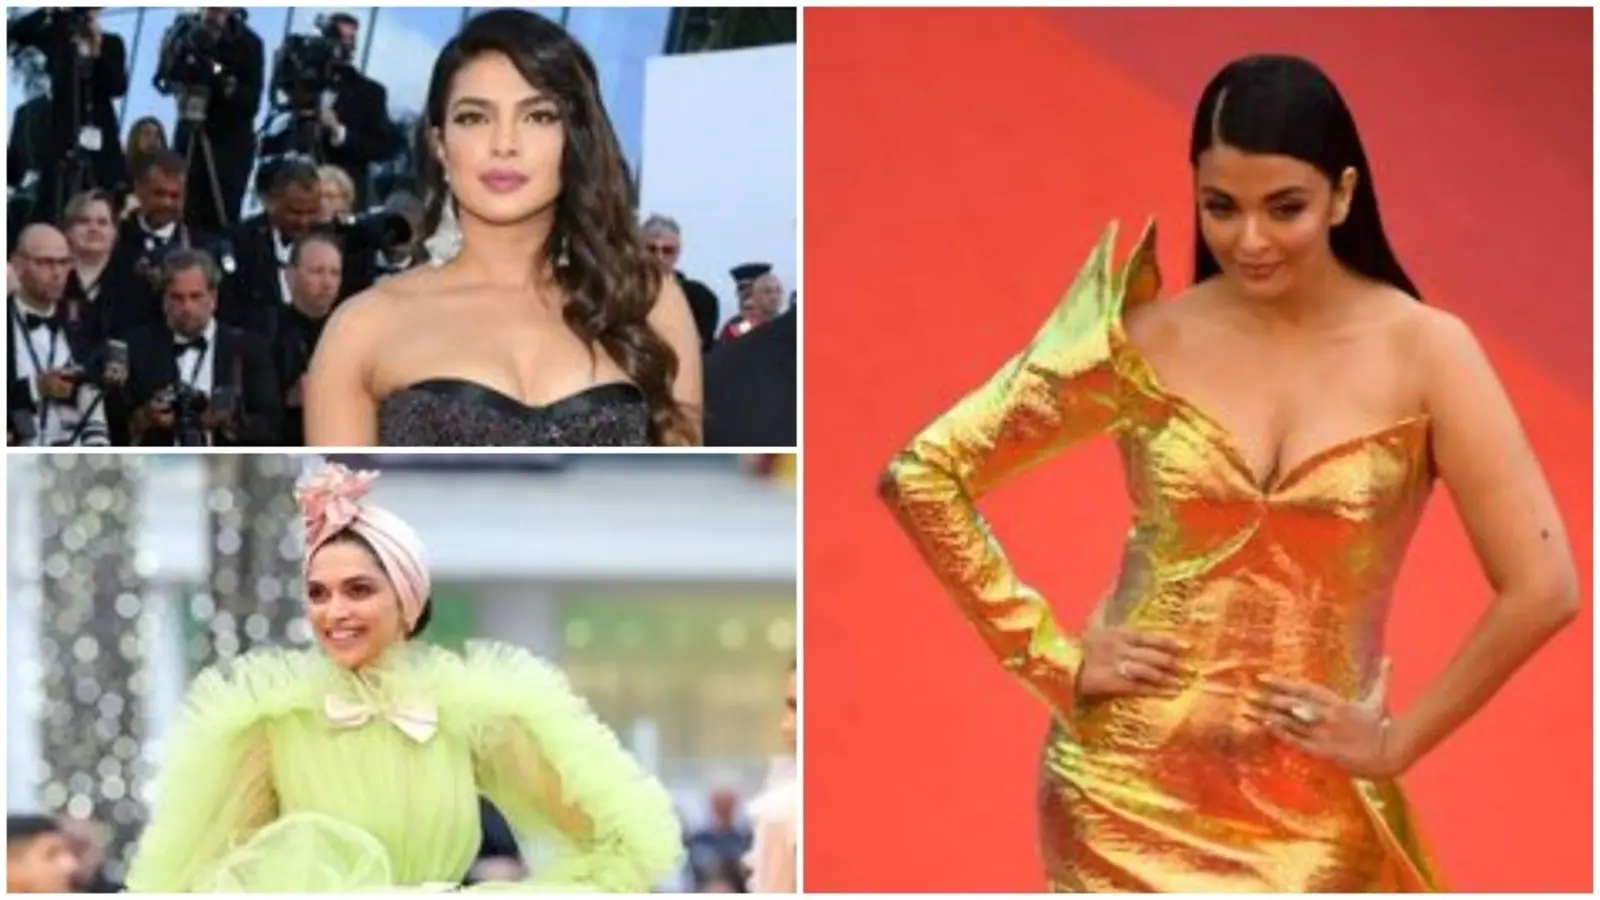 Cannes 2022: Looking back at the worst fashion moments